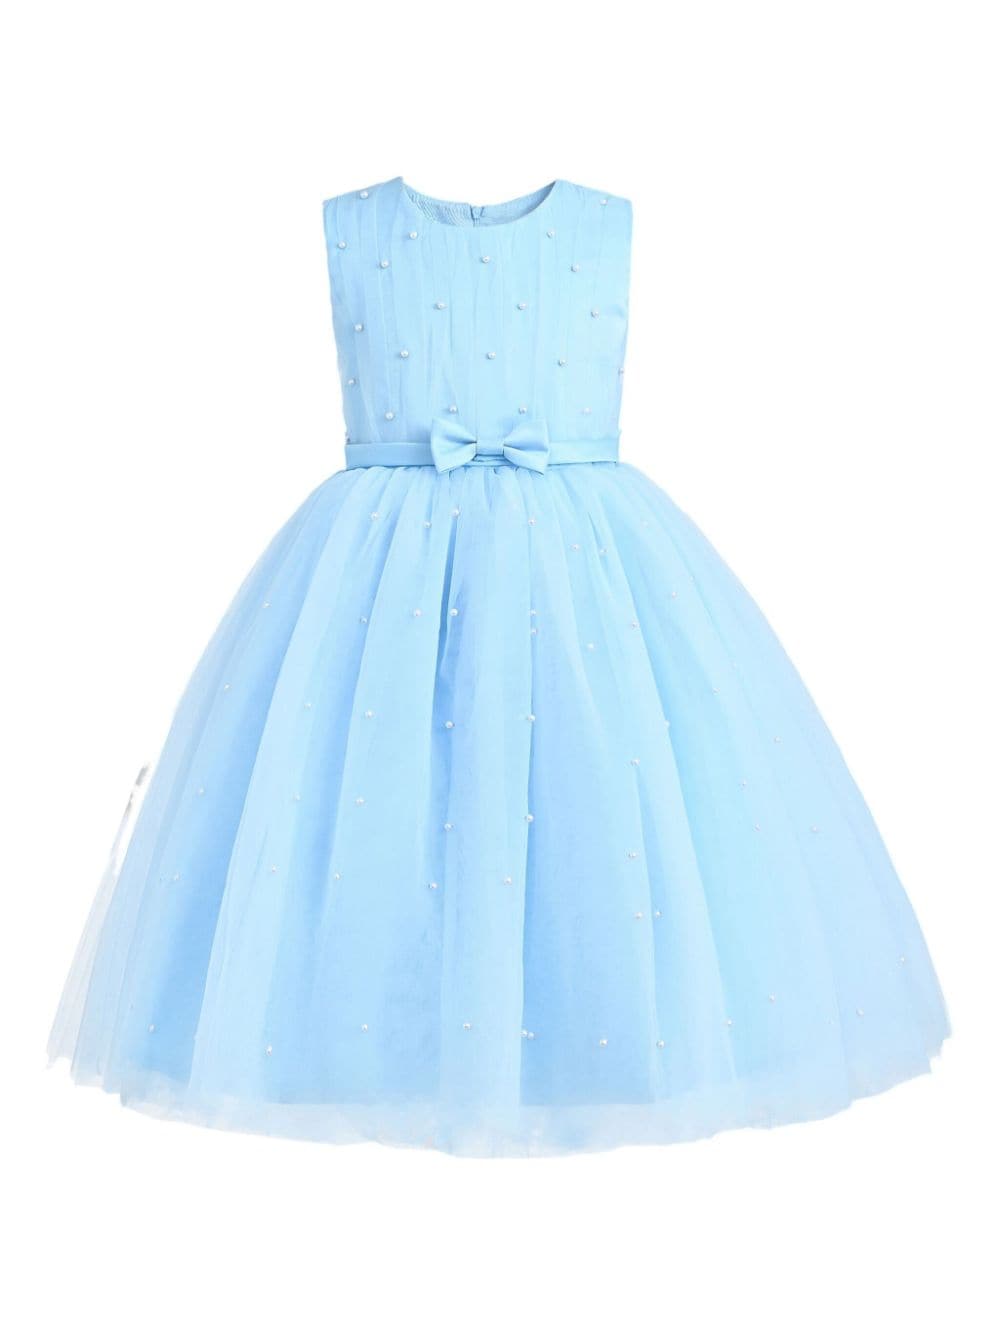 Tulleen pearl-embellished tulle dress - Blue von Tulleen